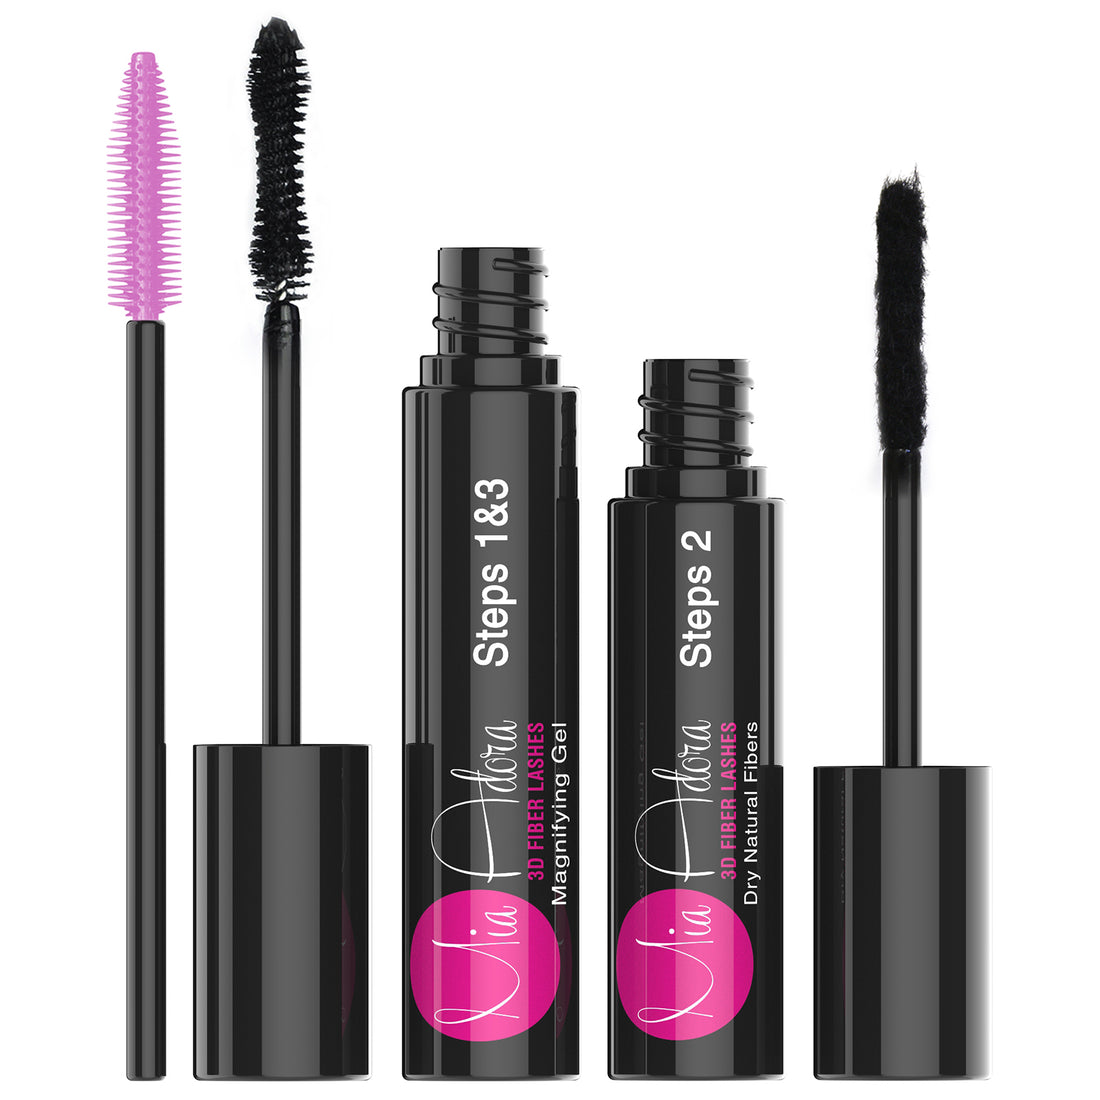 Best 3D Fiber Lash Mascara for Miss America Pageant in New Jersey